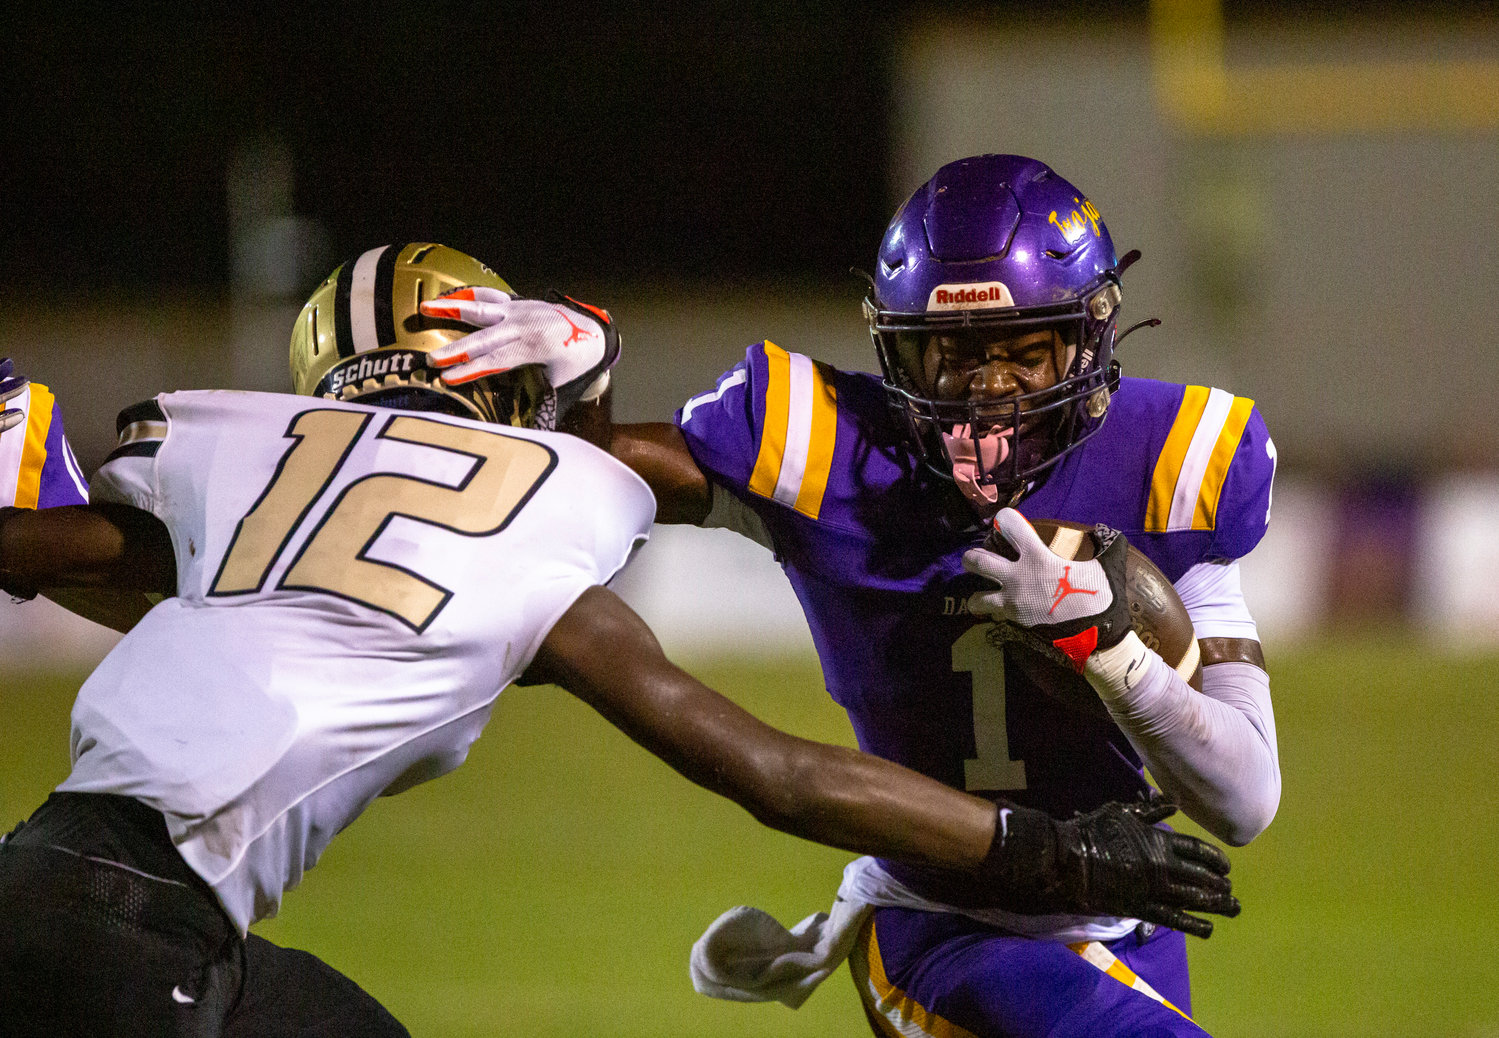 Daphne senior Stacey Boykins meets with a Davidson defender on the edge during the Trojans’ region contest against the Warriors at home Sept. 9. Daphne is looking for a third straight win Friday against Baker back at home.